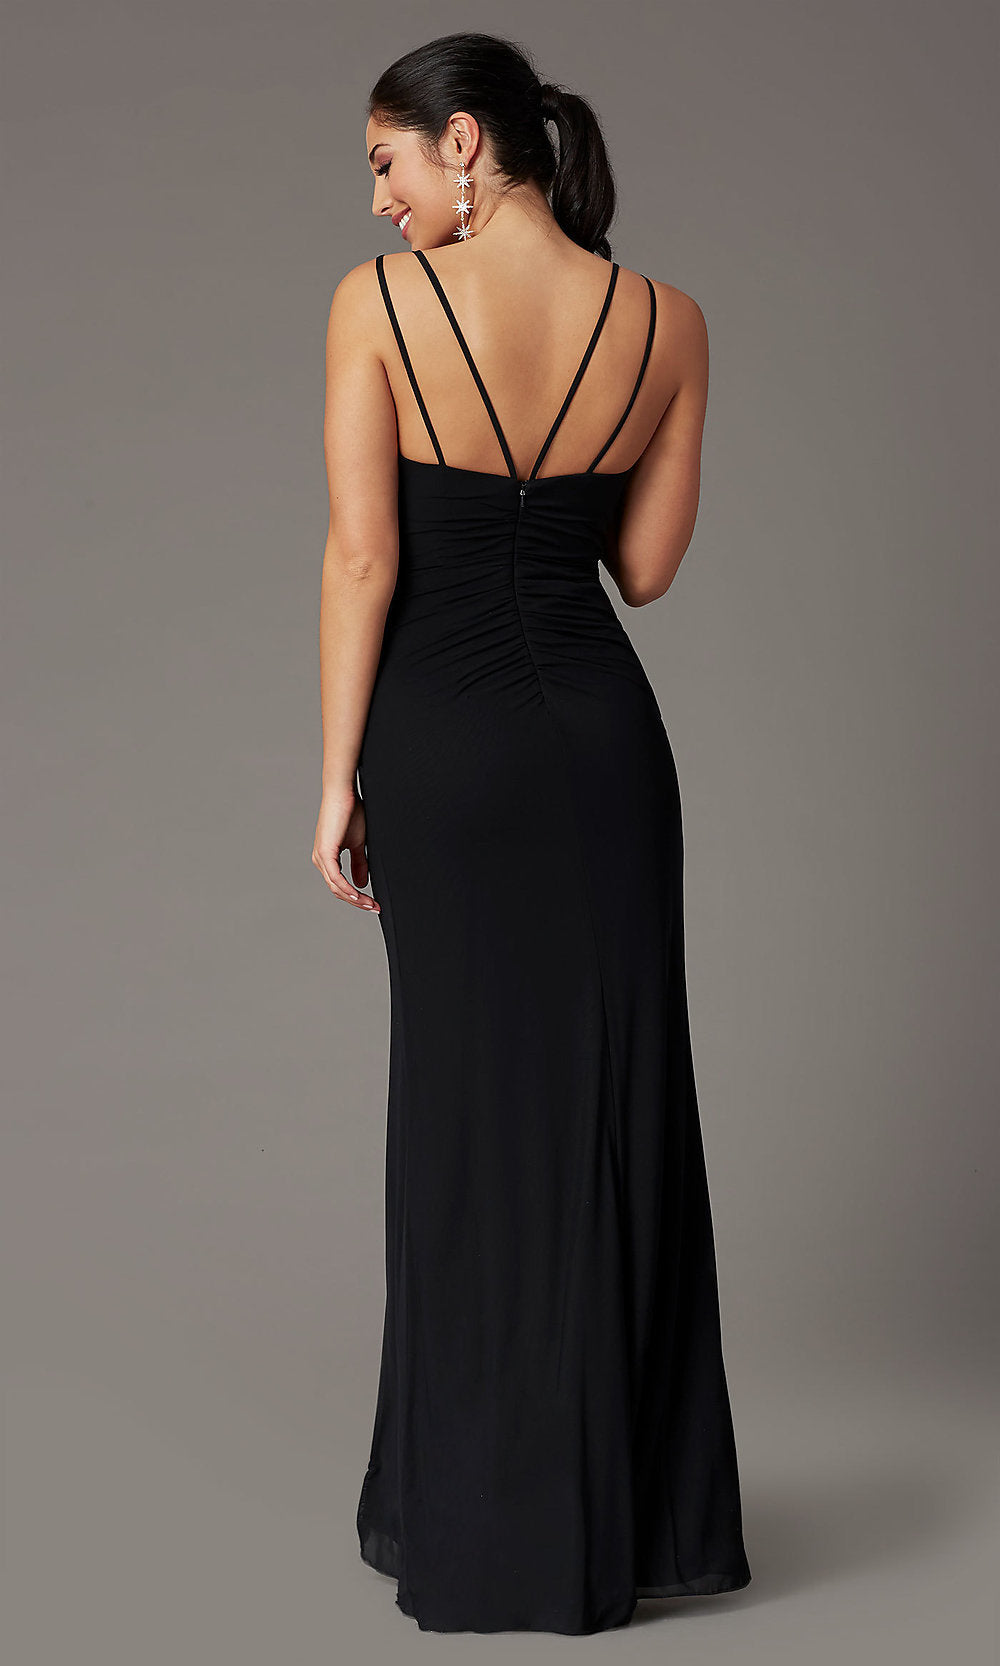 Dancing Queen-Long V-Neck Ruched Classic Prom Dress 